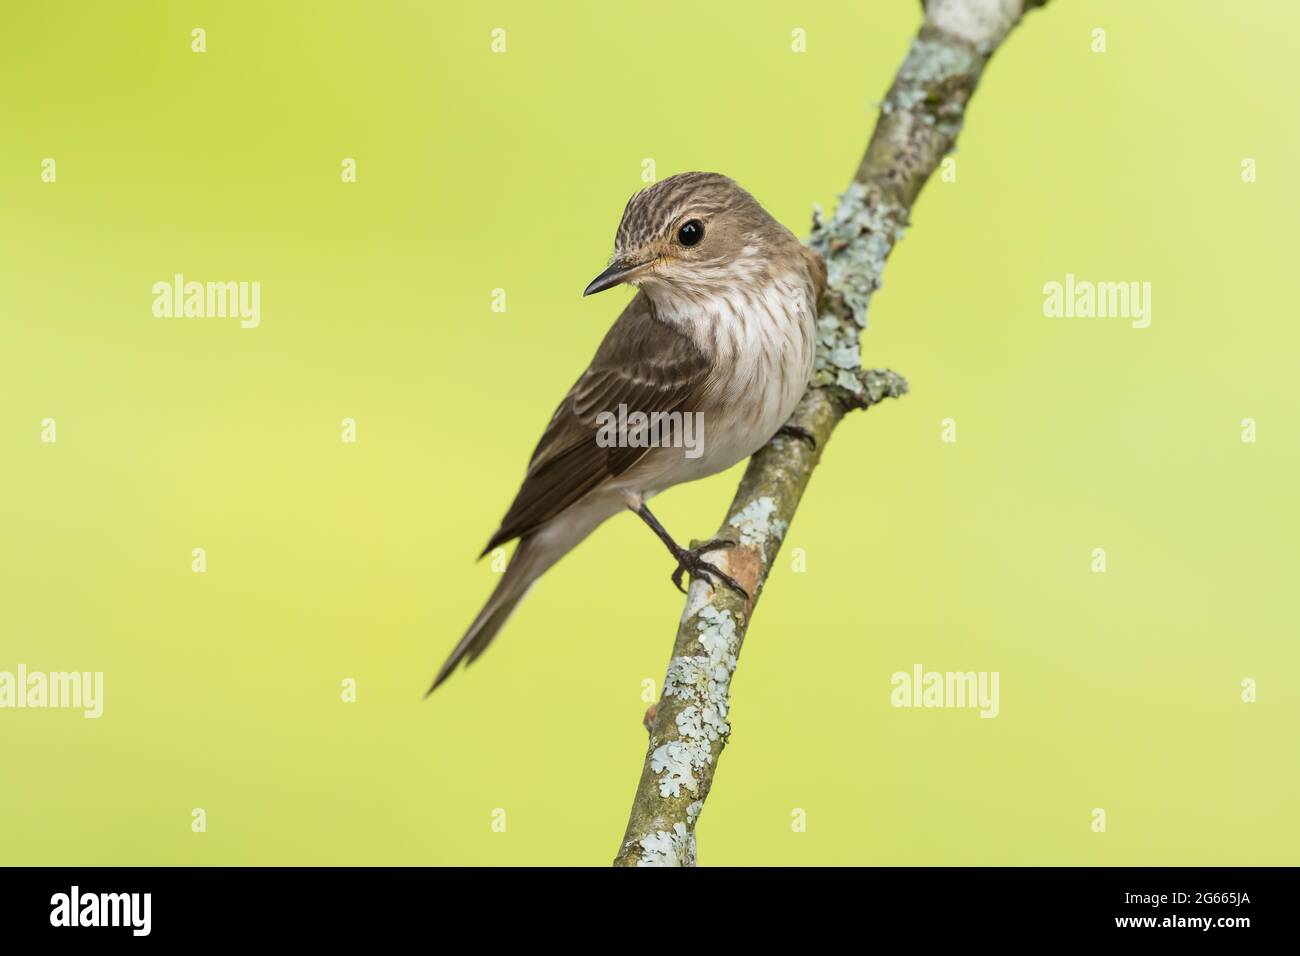 Spotted Flycatcher on an apple tree branch Stock Photo